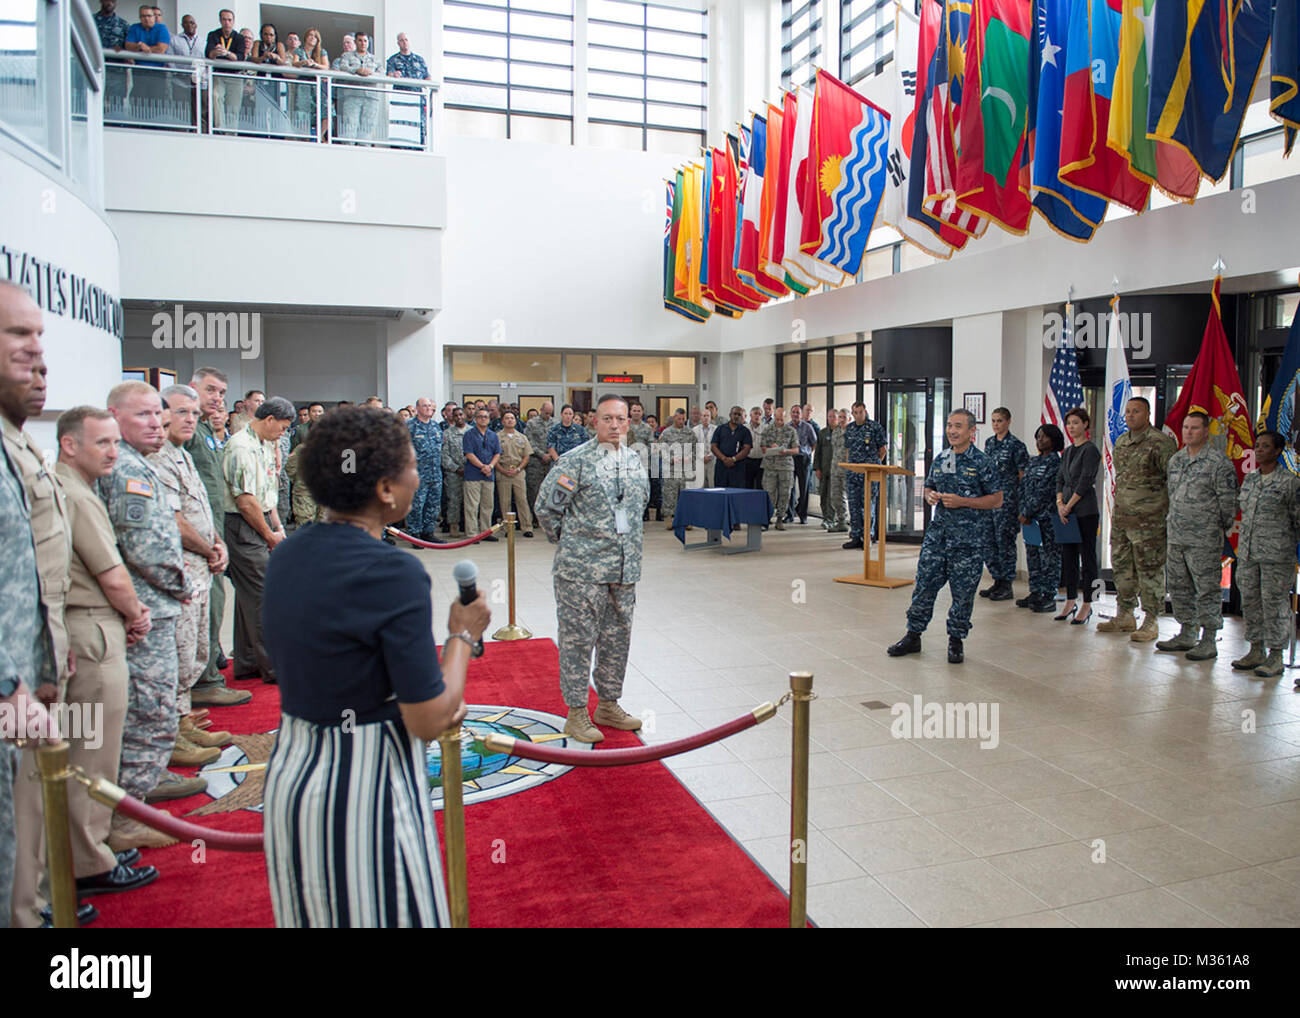 150806-N-DX698-074 CAMP H.M. SMITH (Aug. 6, 2015) Adm. Harry B. Harris, Jr., commander of U.S. Pacific Command, holds an awards ceremony and all-hands call at Pacific Command headquarters. Harris gave updates on events he conducted in the Pacific region including the Shangri-La Dialogue and the Military Child Education Coalition seminar. (U.S. Navy photo by Mass Communication Specialist 1st Class Jay M. Chu/Released) PACOM Commander Holds Awards Ceremony and All-Hands Call by #PACOM Stock Photo